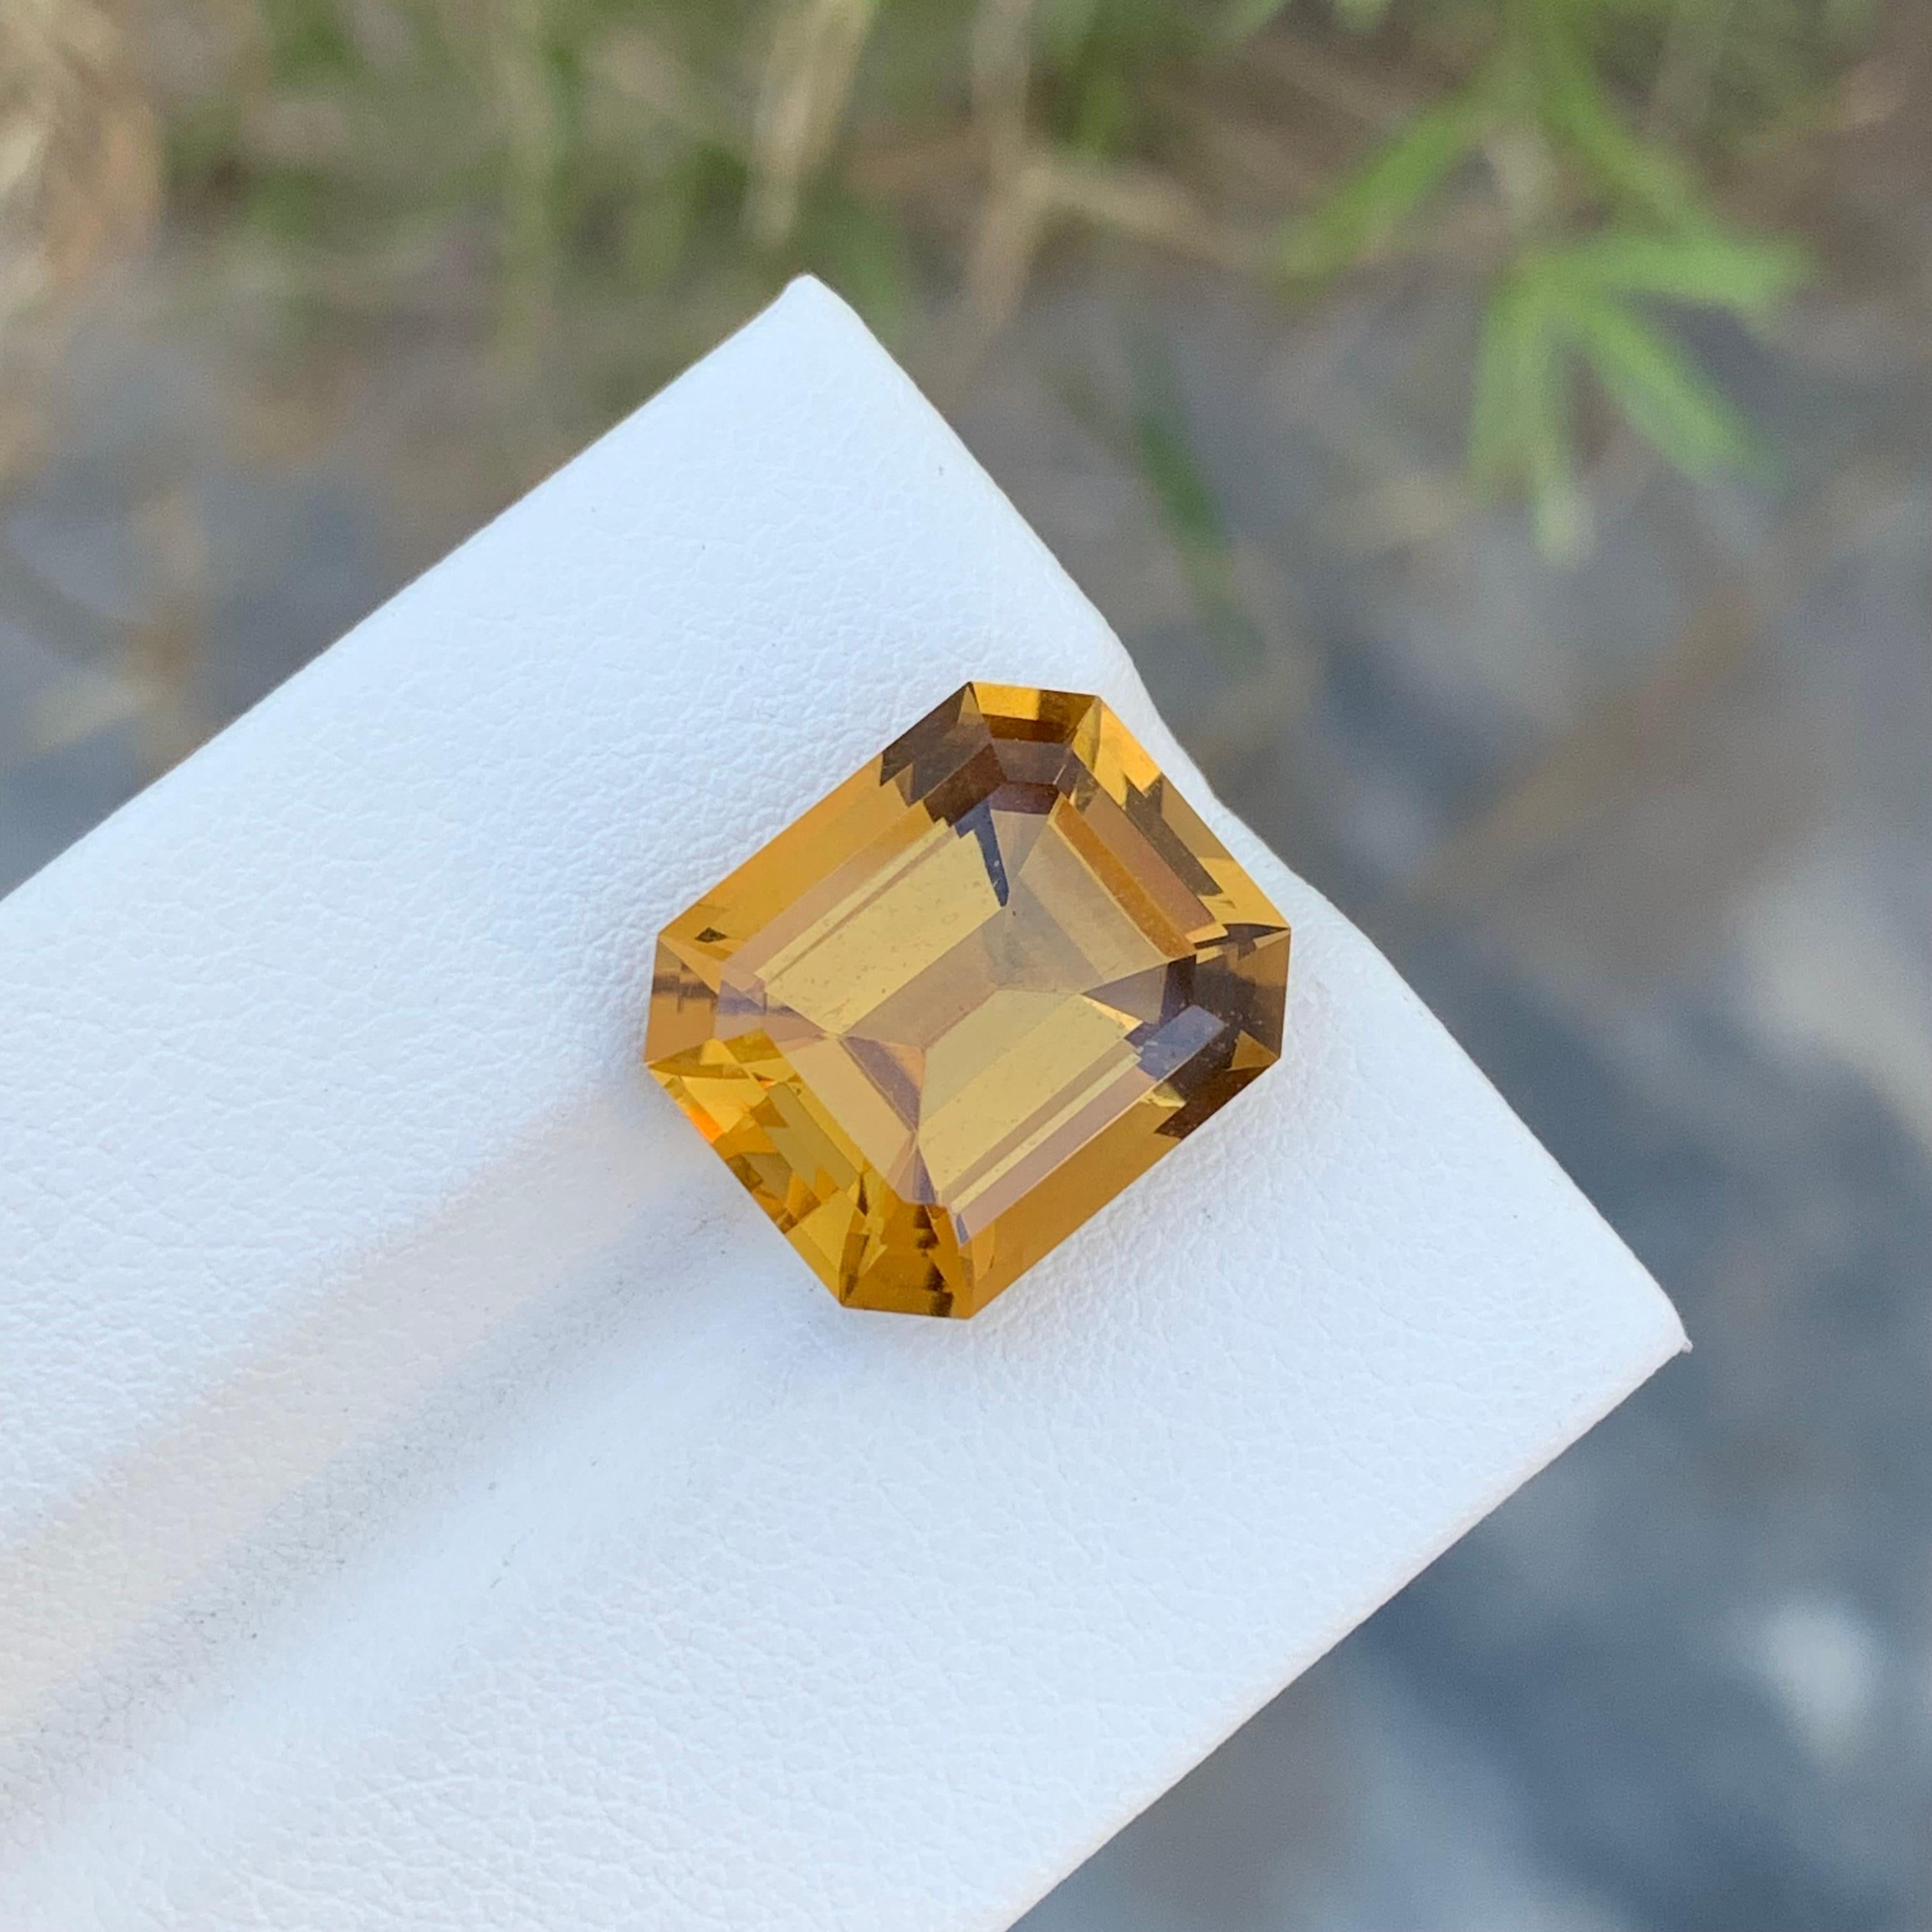 Loose Citrine
Weight: 8.55 Carats
Dimension: 14 x 11.6 x 8.1 Mm
Origin: Brazil
Shape: Emerald
Color: Yellow
Treatment: Non
Certificate: On Demand
Citrine is a vibrant and sunny gemstone celebrated for its warm, golden-yellow to orange hues. This